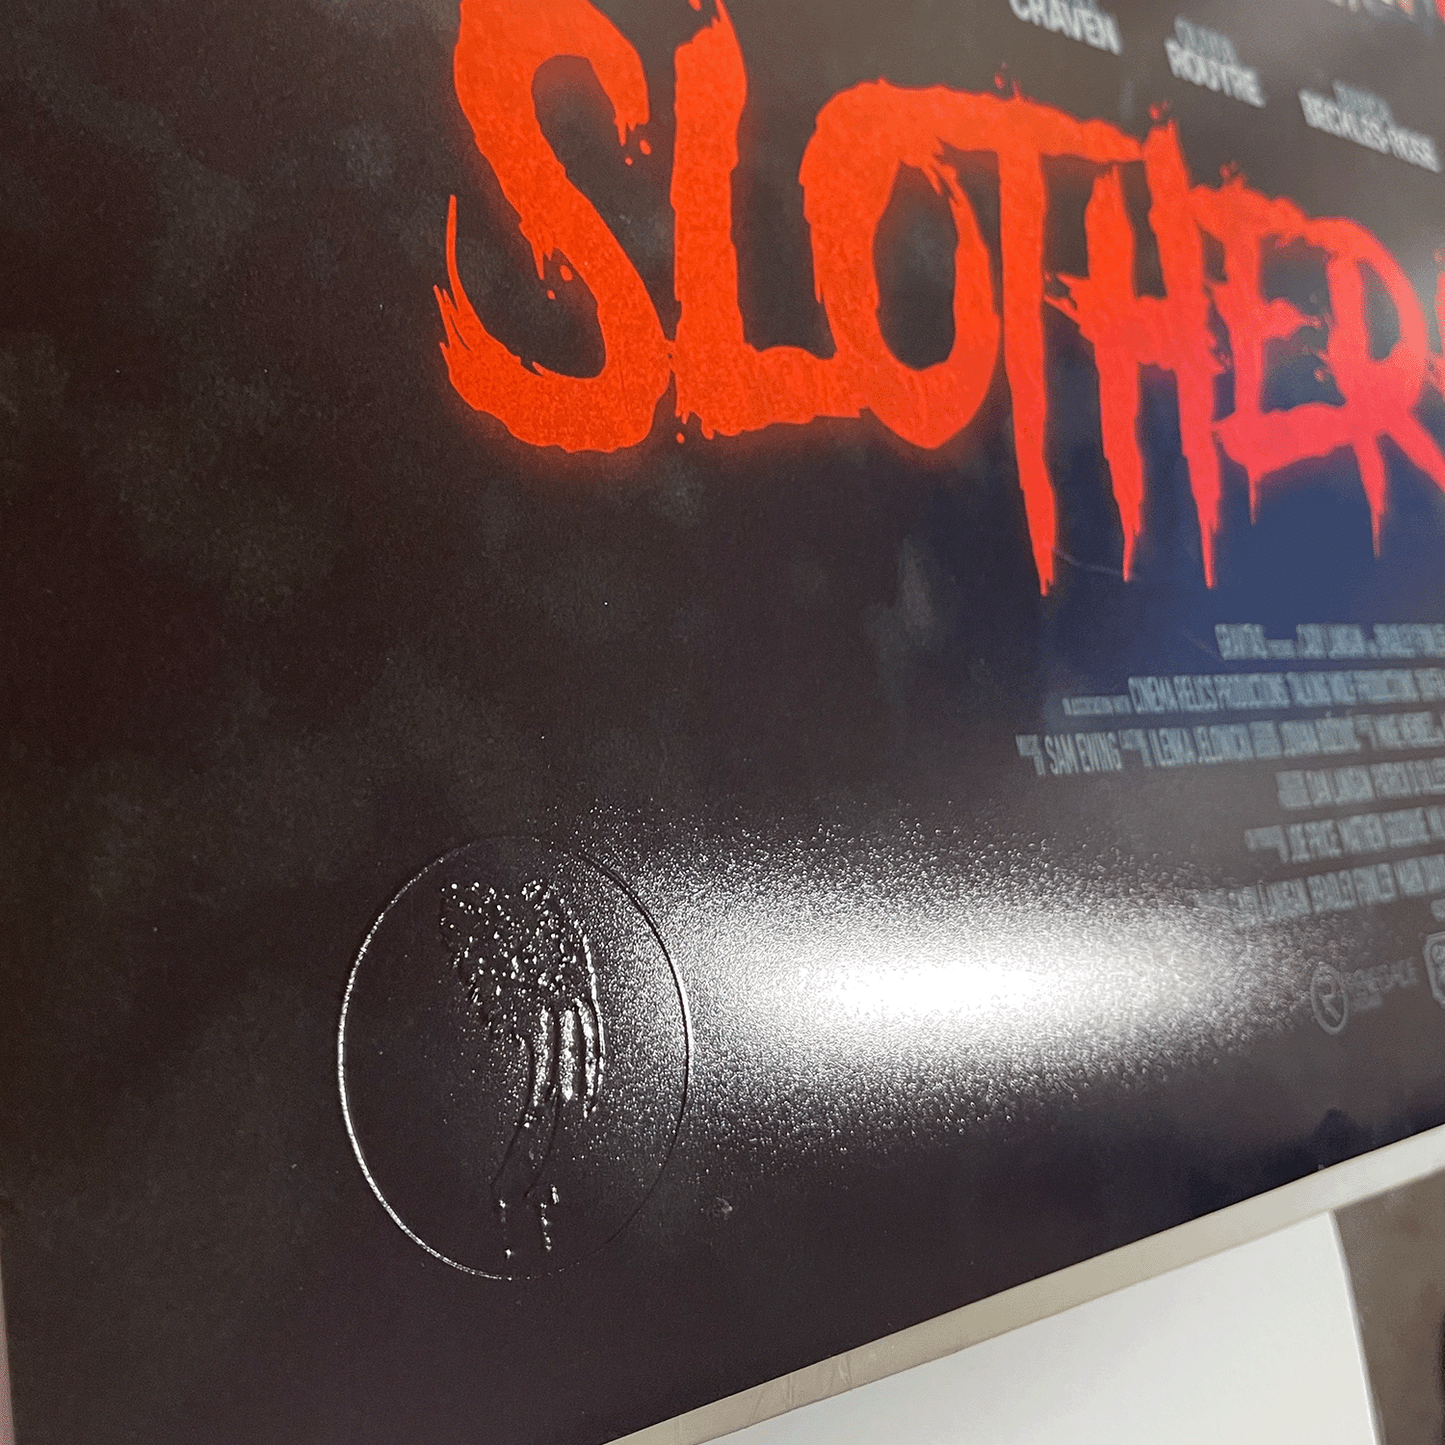 Slotherhouse OFFICIAL Theatrical Movie Poster 24x36-EMBOSSED